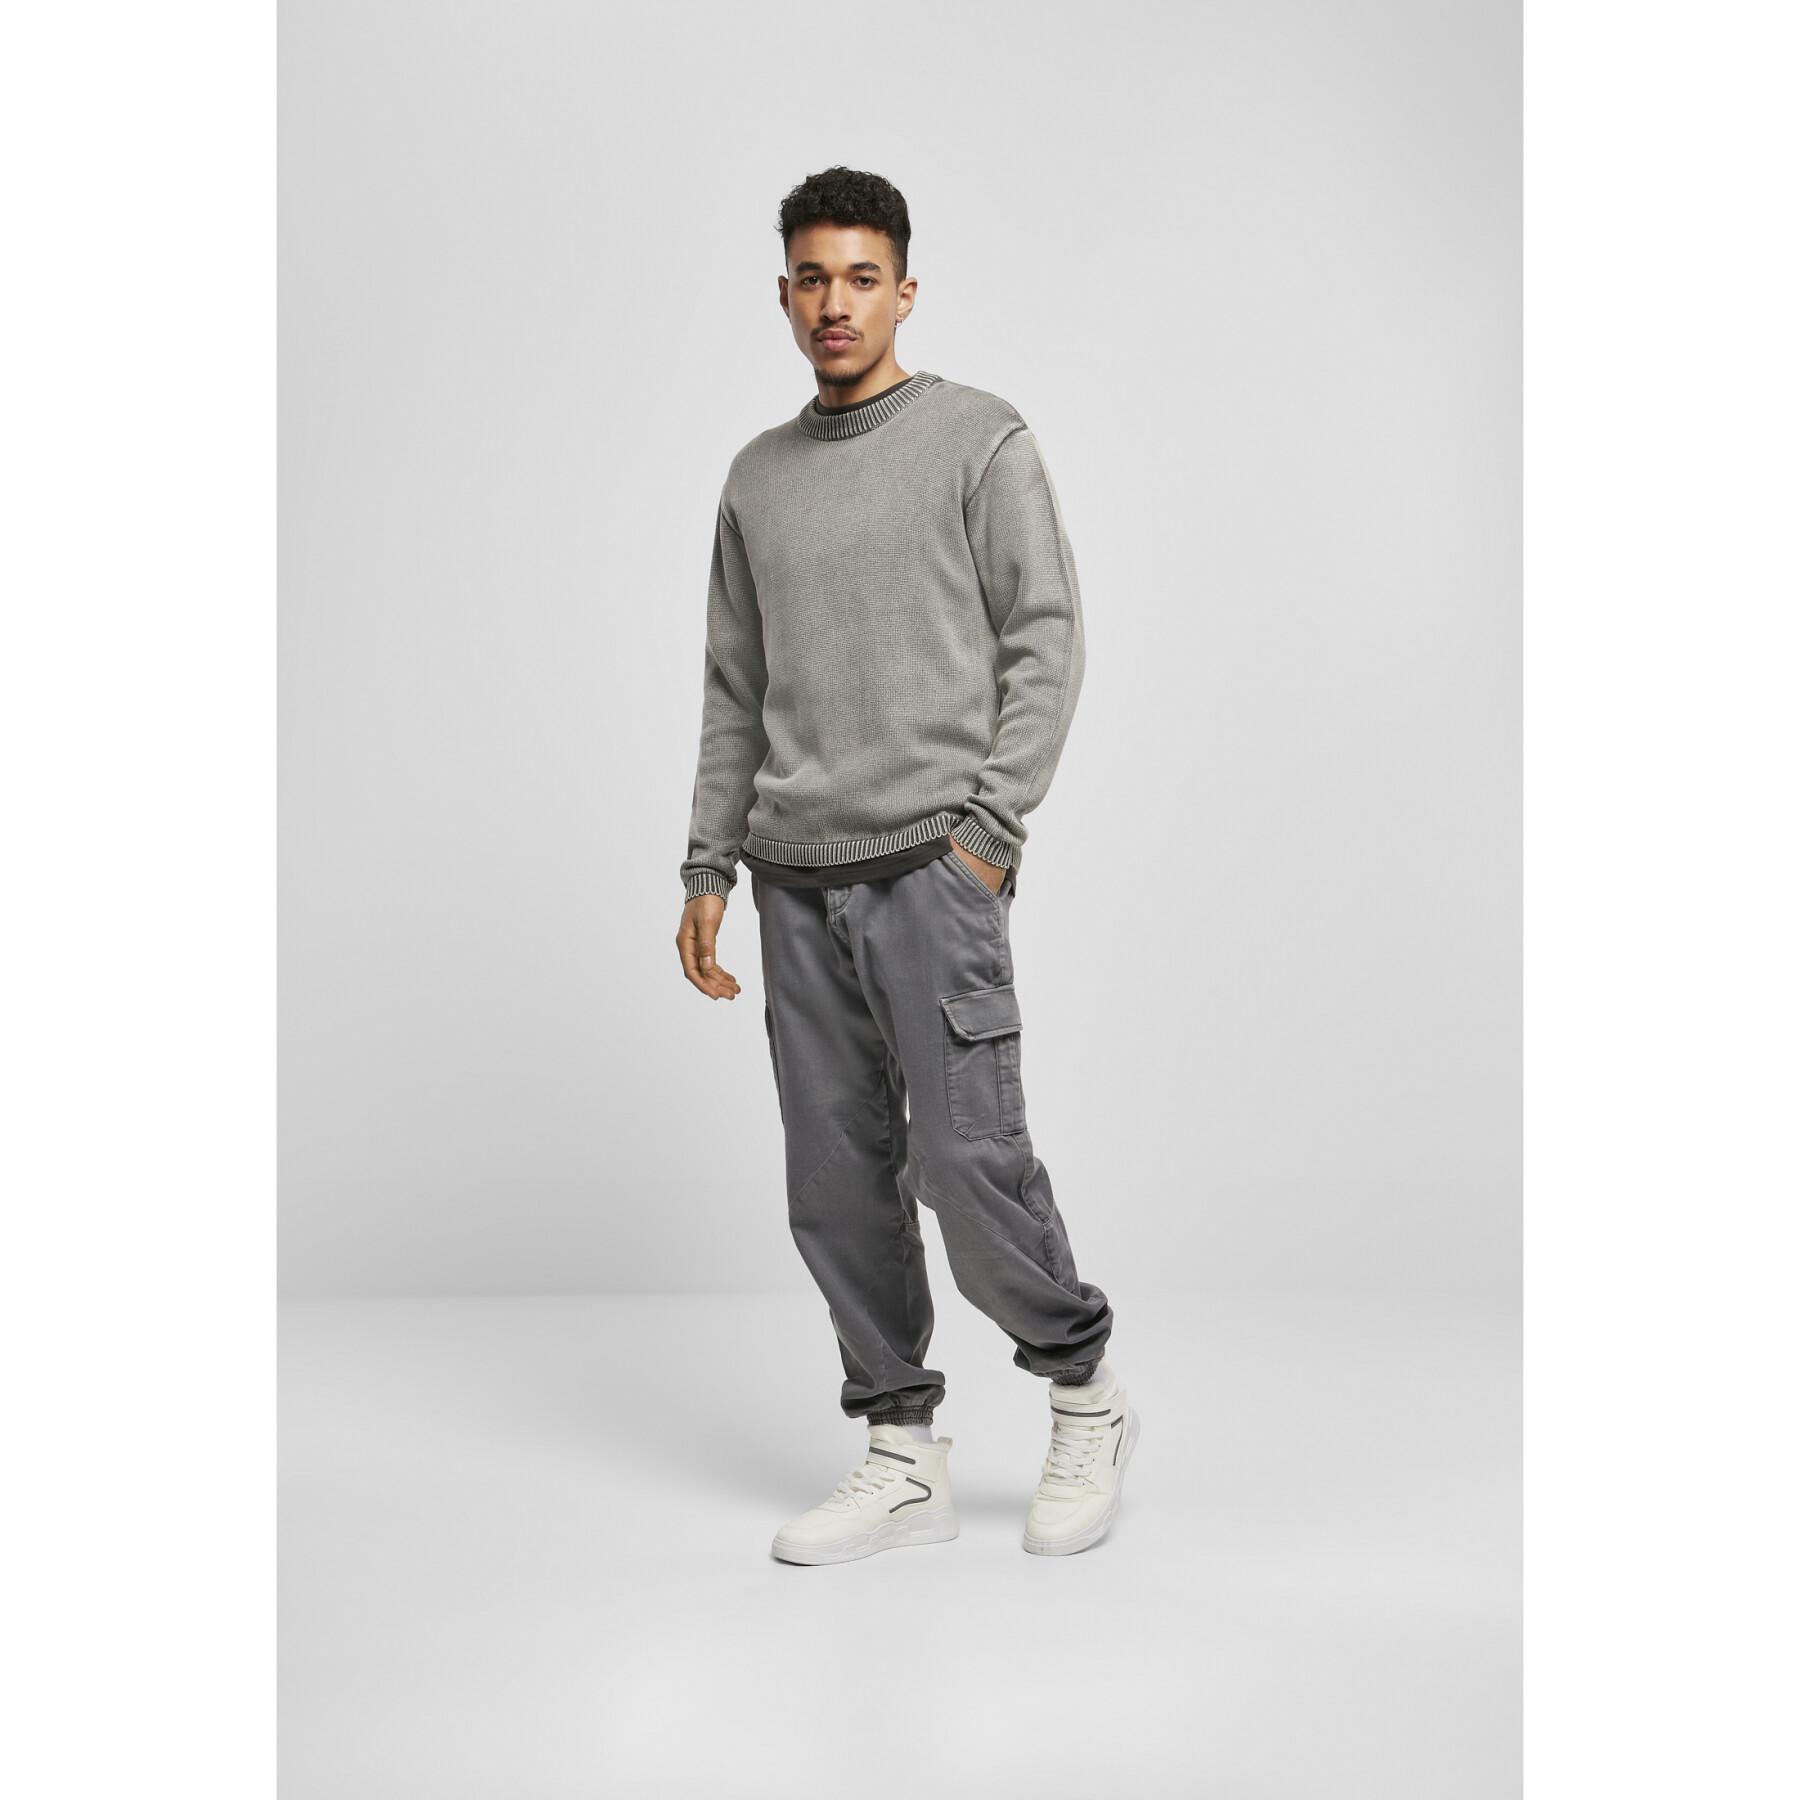 Pullover Urban Classics washed